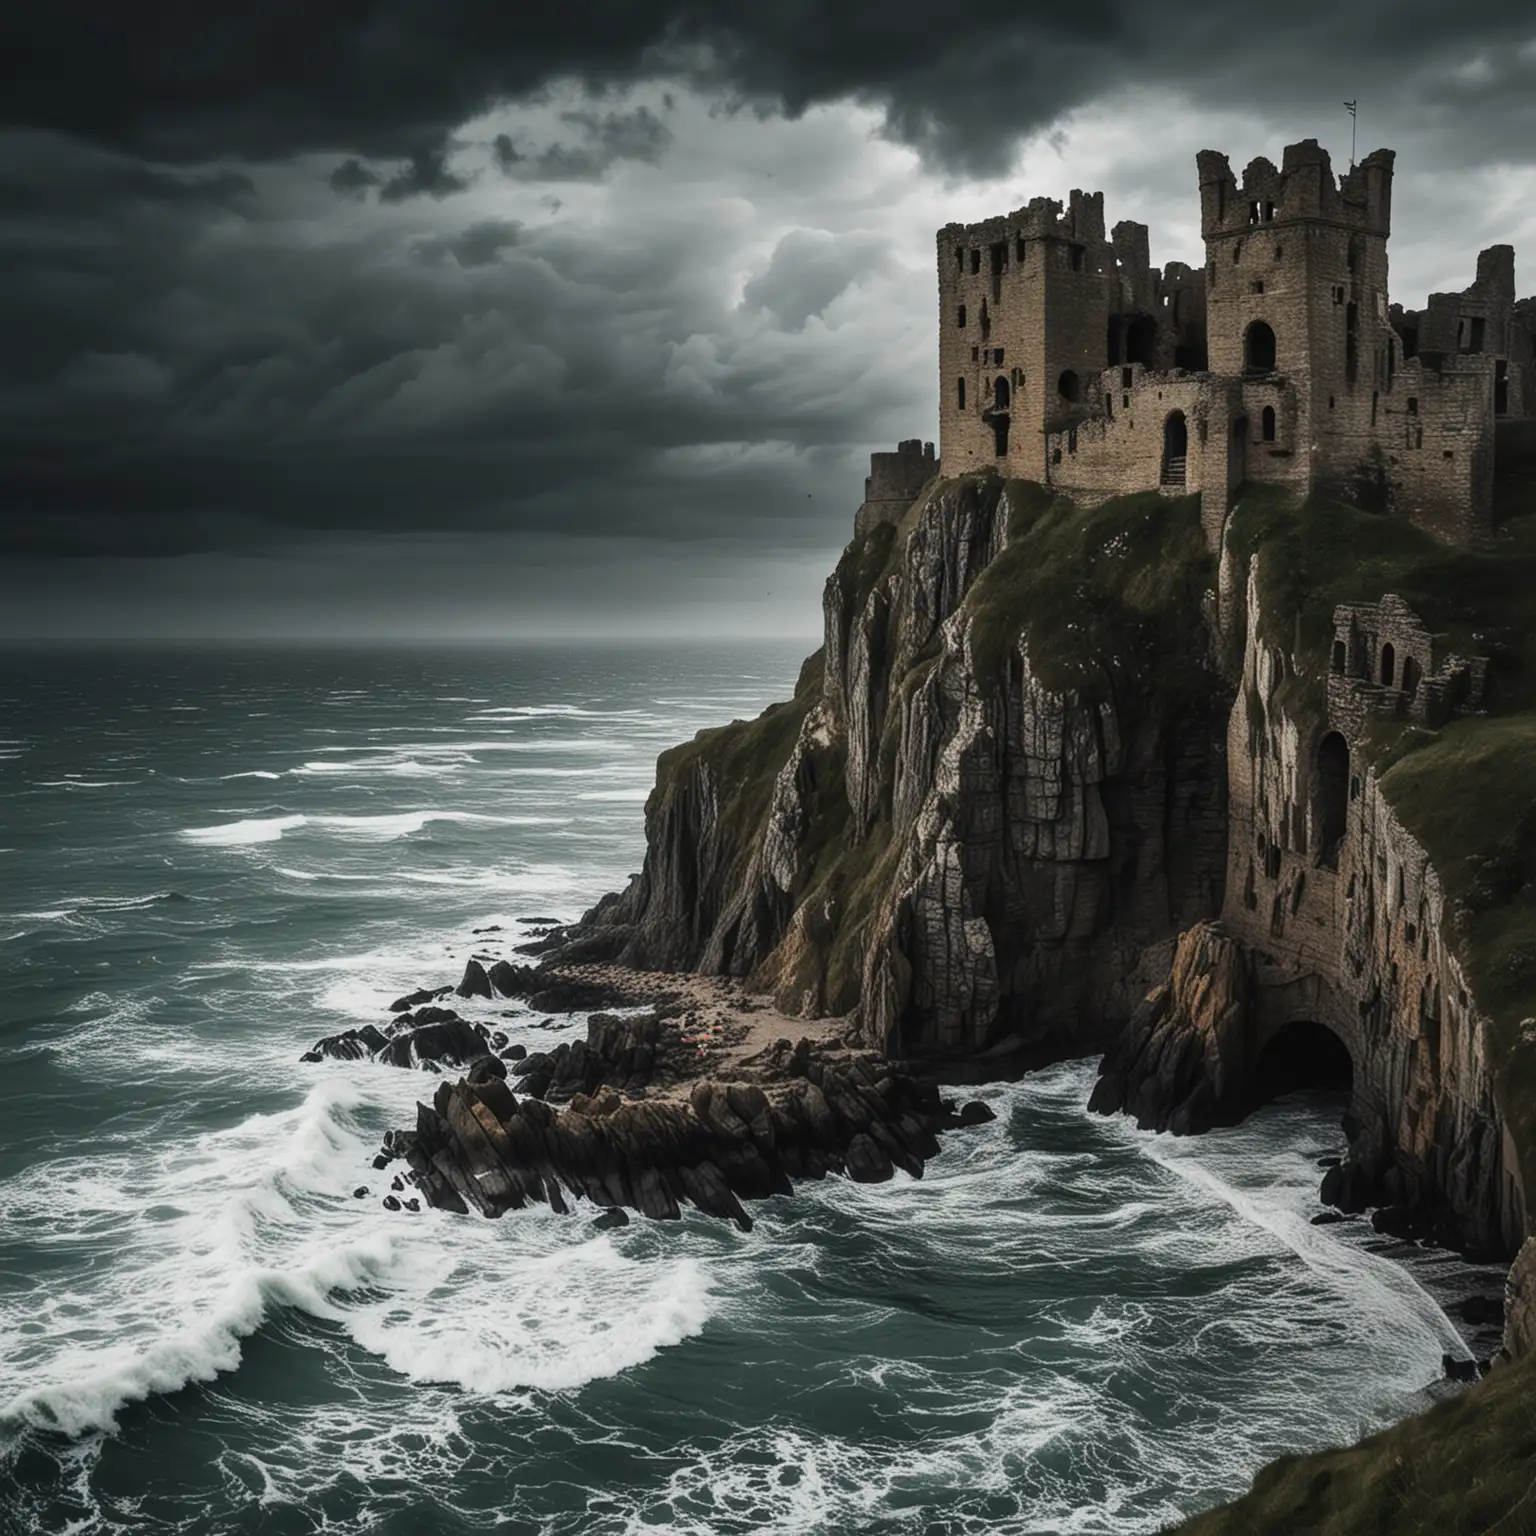 Ruined castle on a cliff overlooking the sea, with a stormy sky and crashing waves, eerie, moody, atmospheric